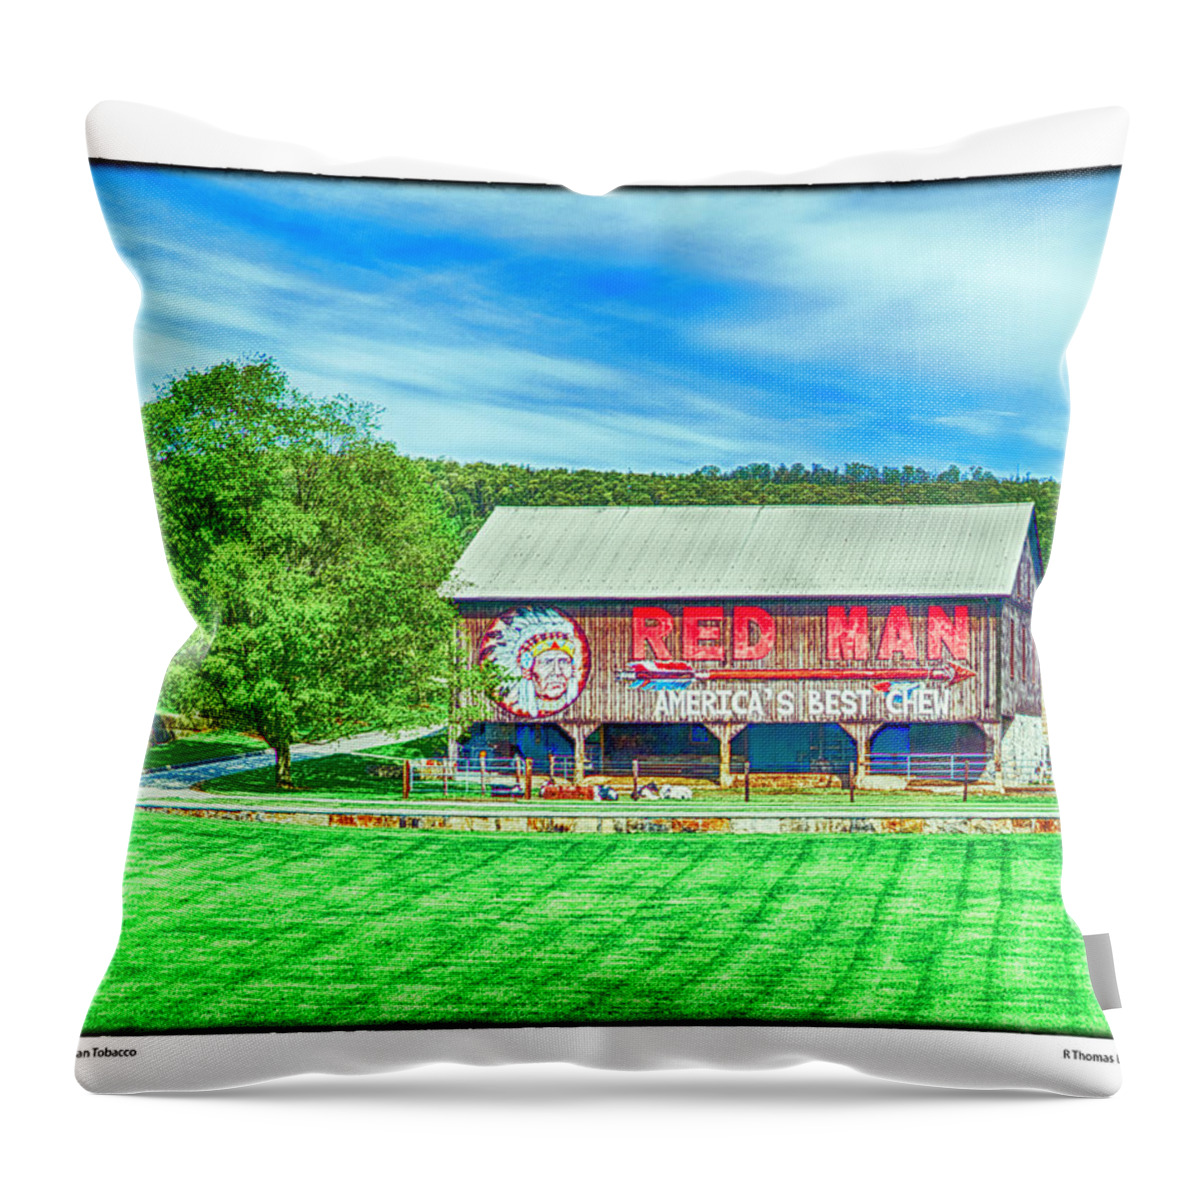 Nostalgia Throw Pillow featuring the photograph Red Man Tobacco by R Thomas Berner